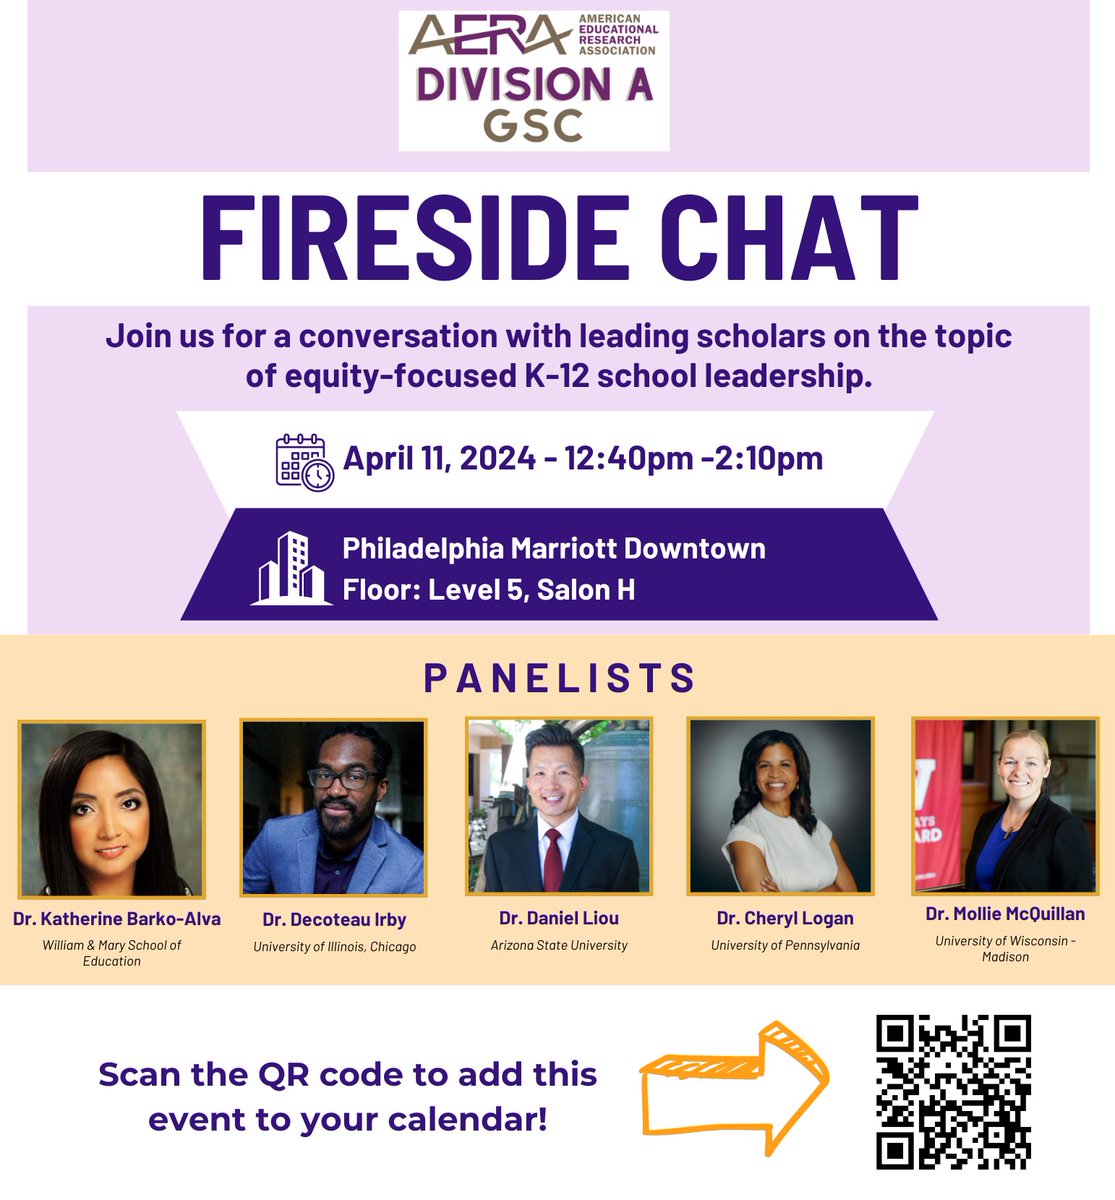 T-1 month to this year's Div A Fireside Chat! We have 5 incredible panelists that will be sharing their equity-focused leadership research and experiences. Scan the QR code to add the event to your calendar, see you soon!